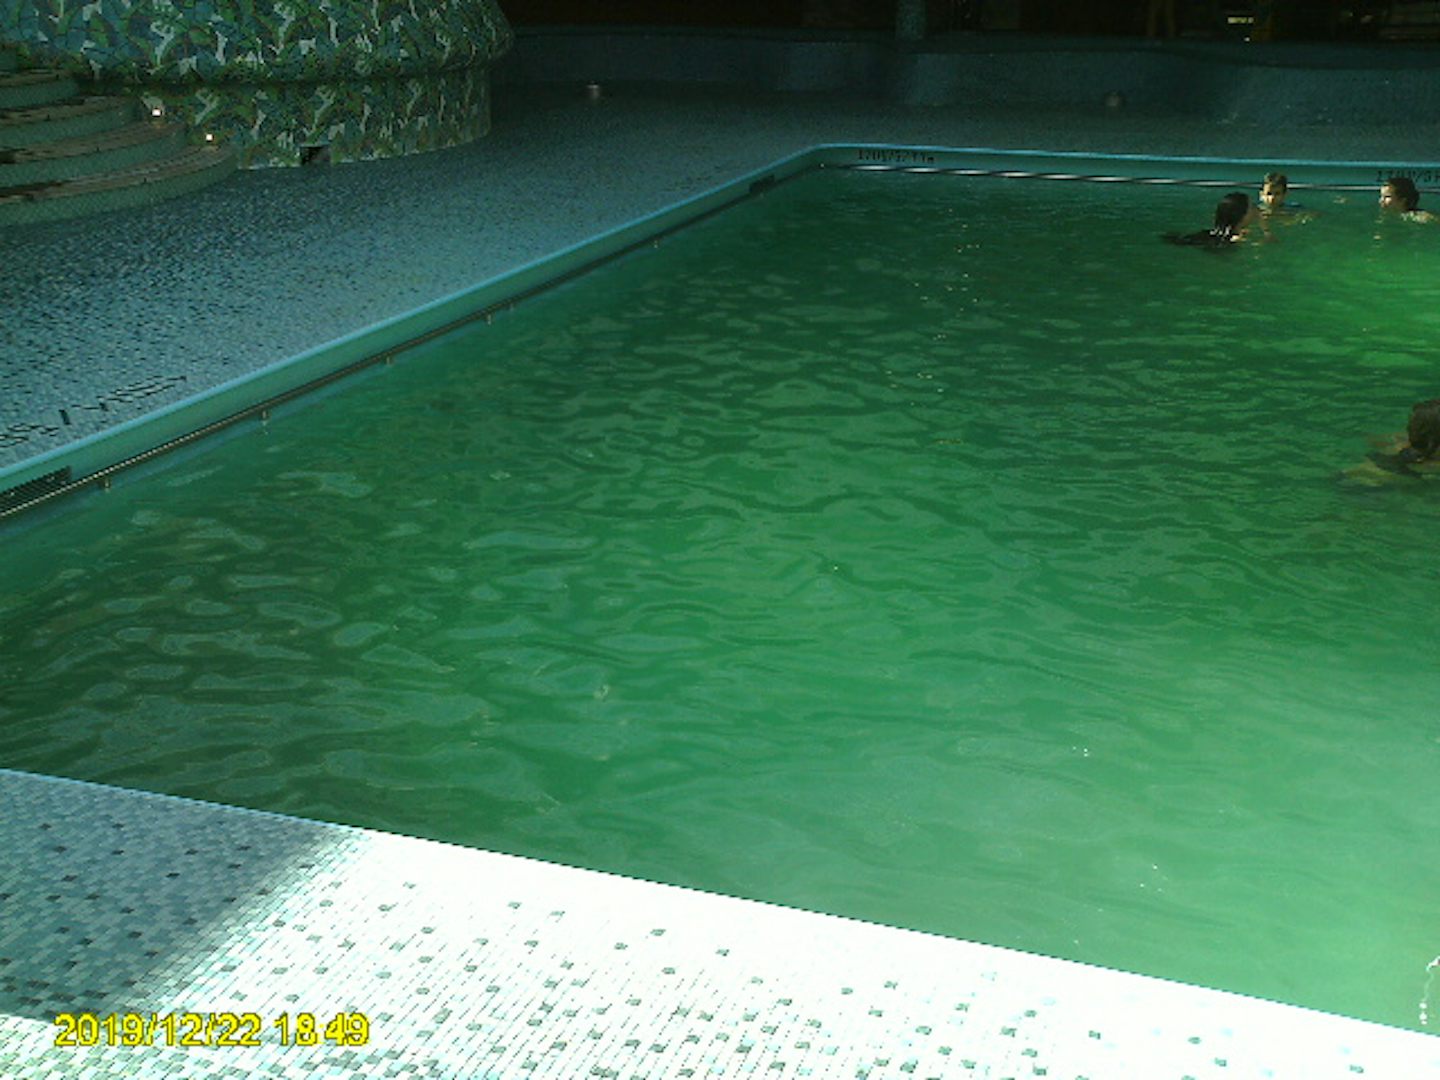 Indoor pool,yucky green all during cruise